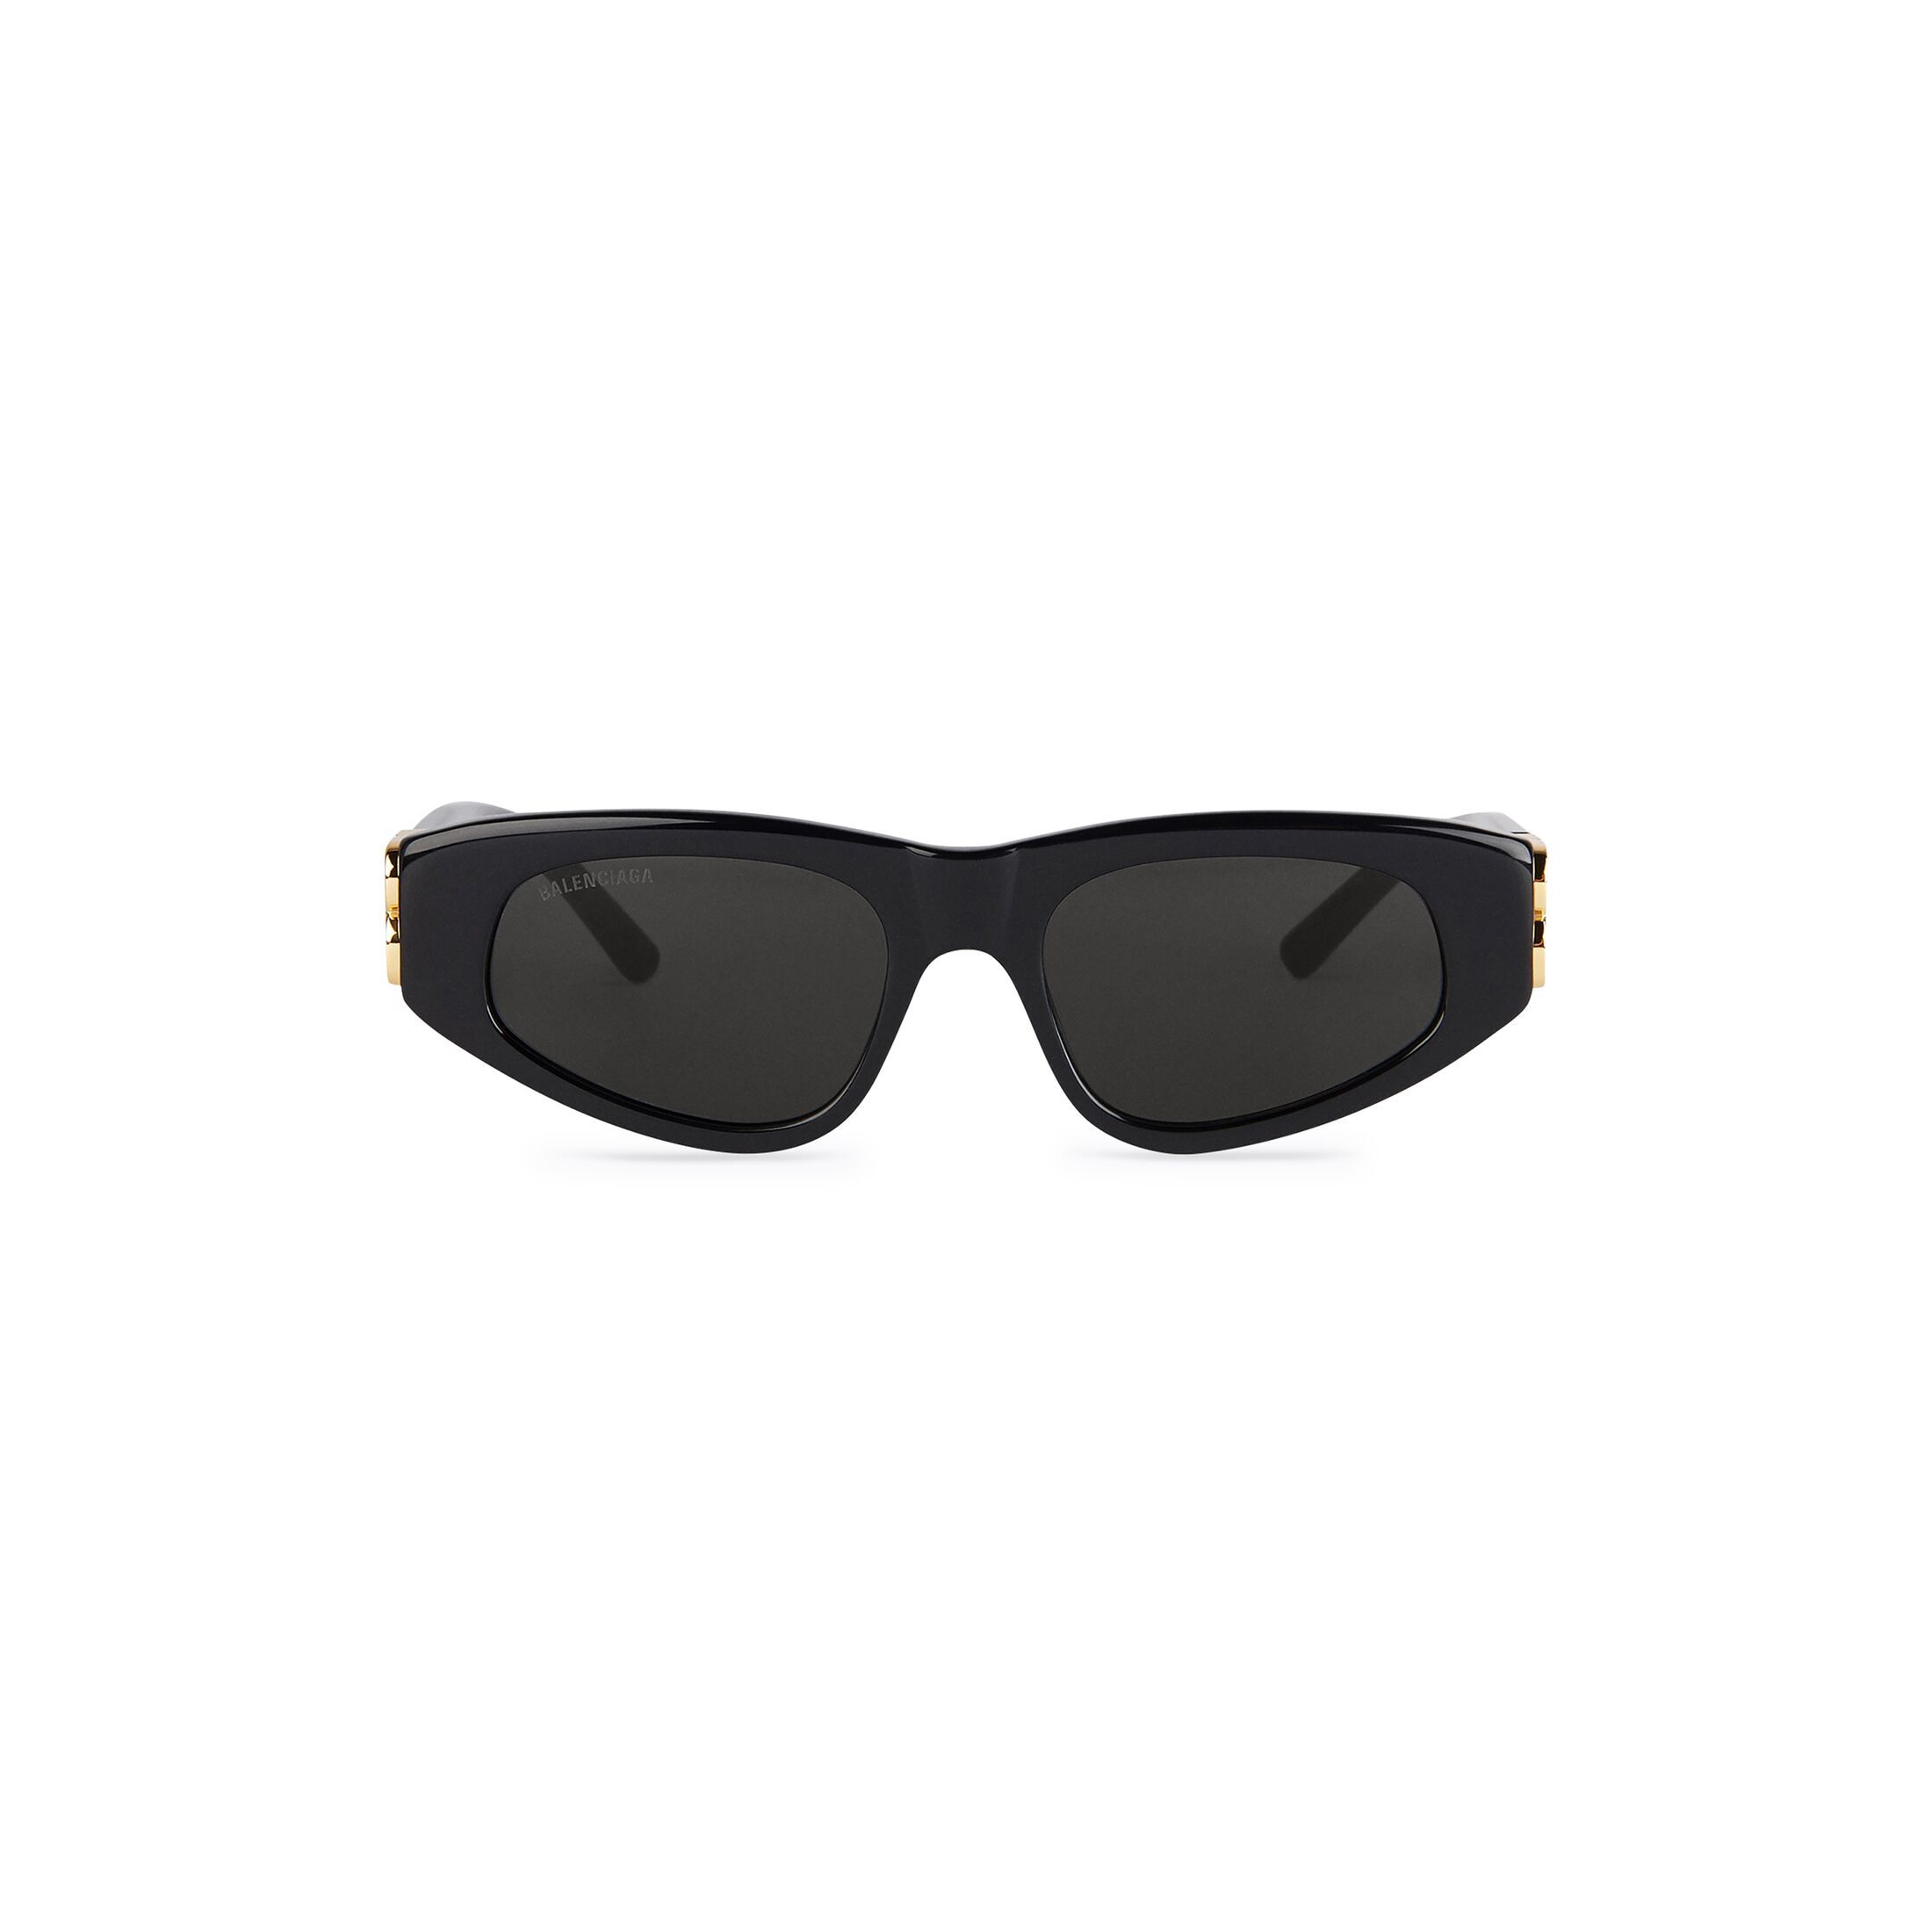 Dynasty D-Frame Sunglasses in black acetate with black lenses, gold toned hardware | Balenciaga